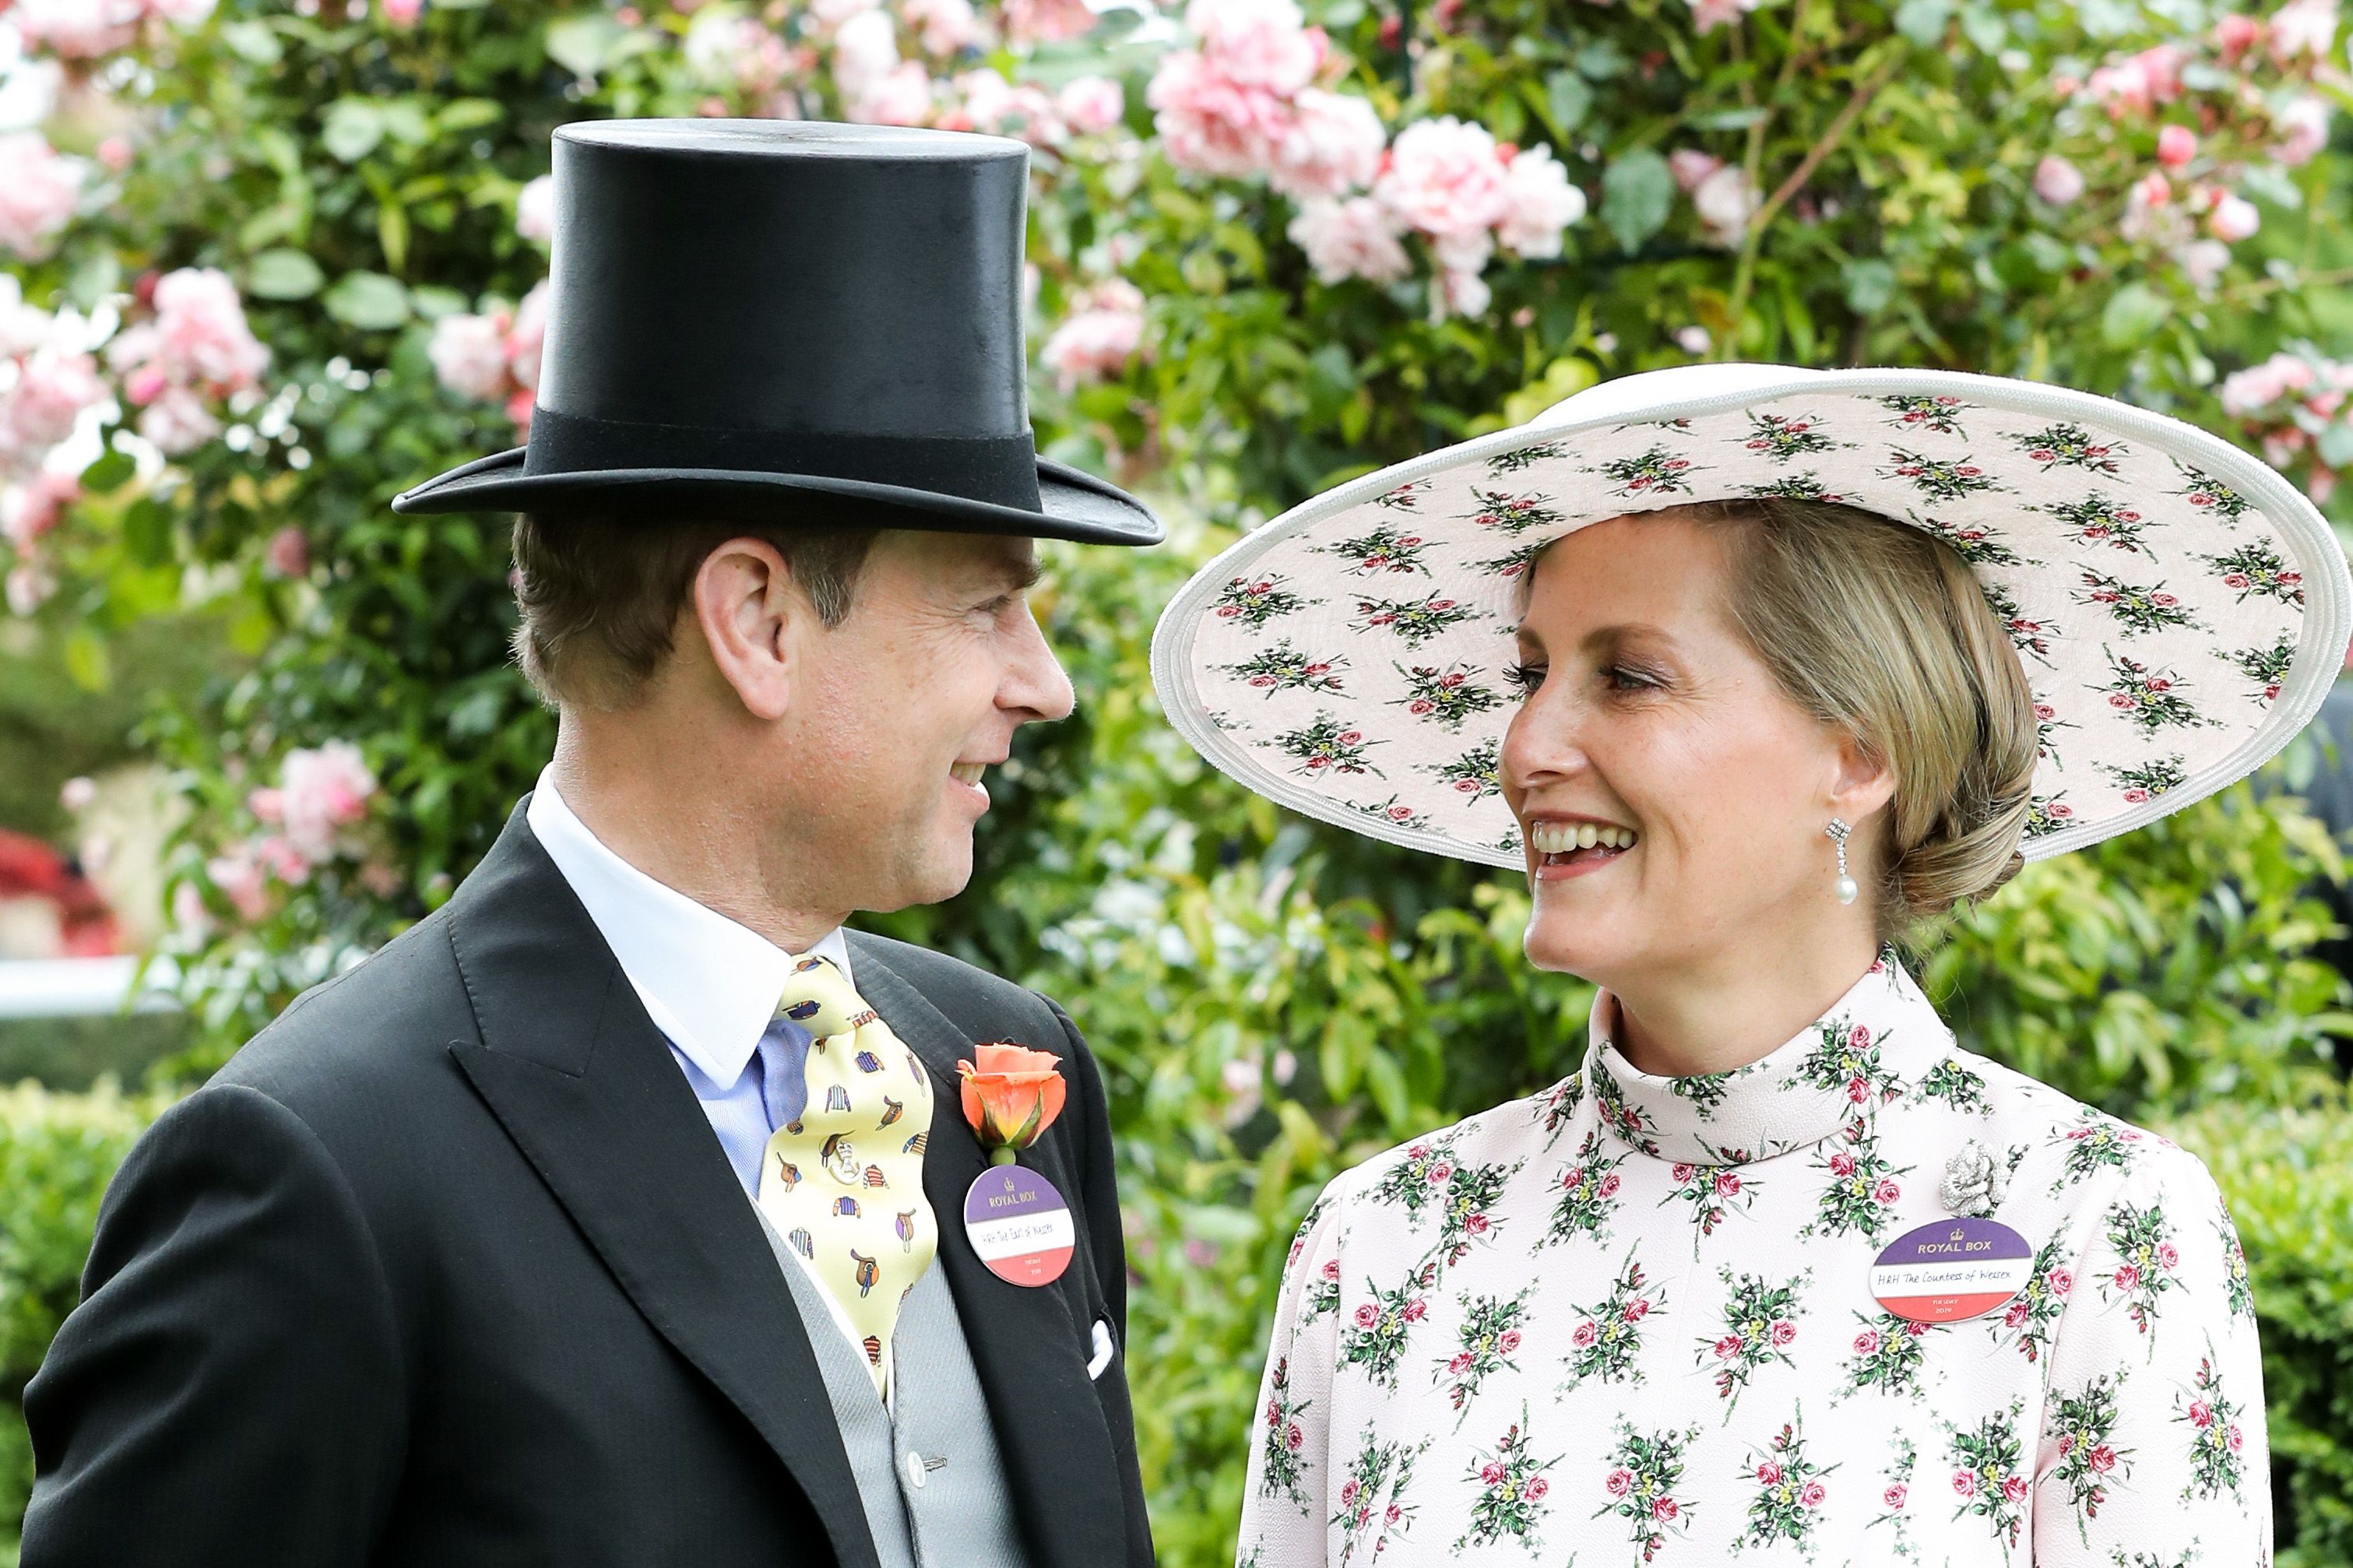 Sophie Wessex looks chic as she joins husband Prince Edward on a